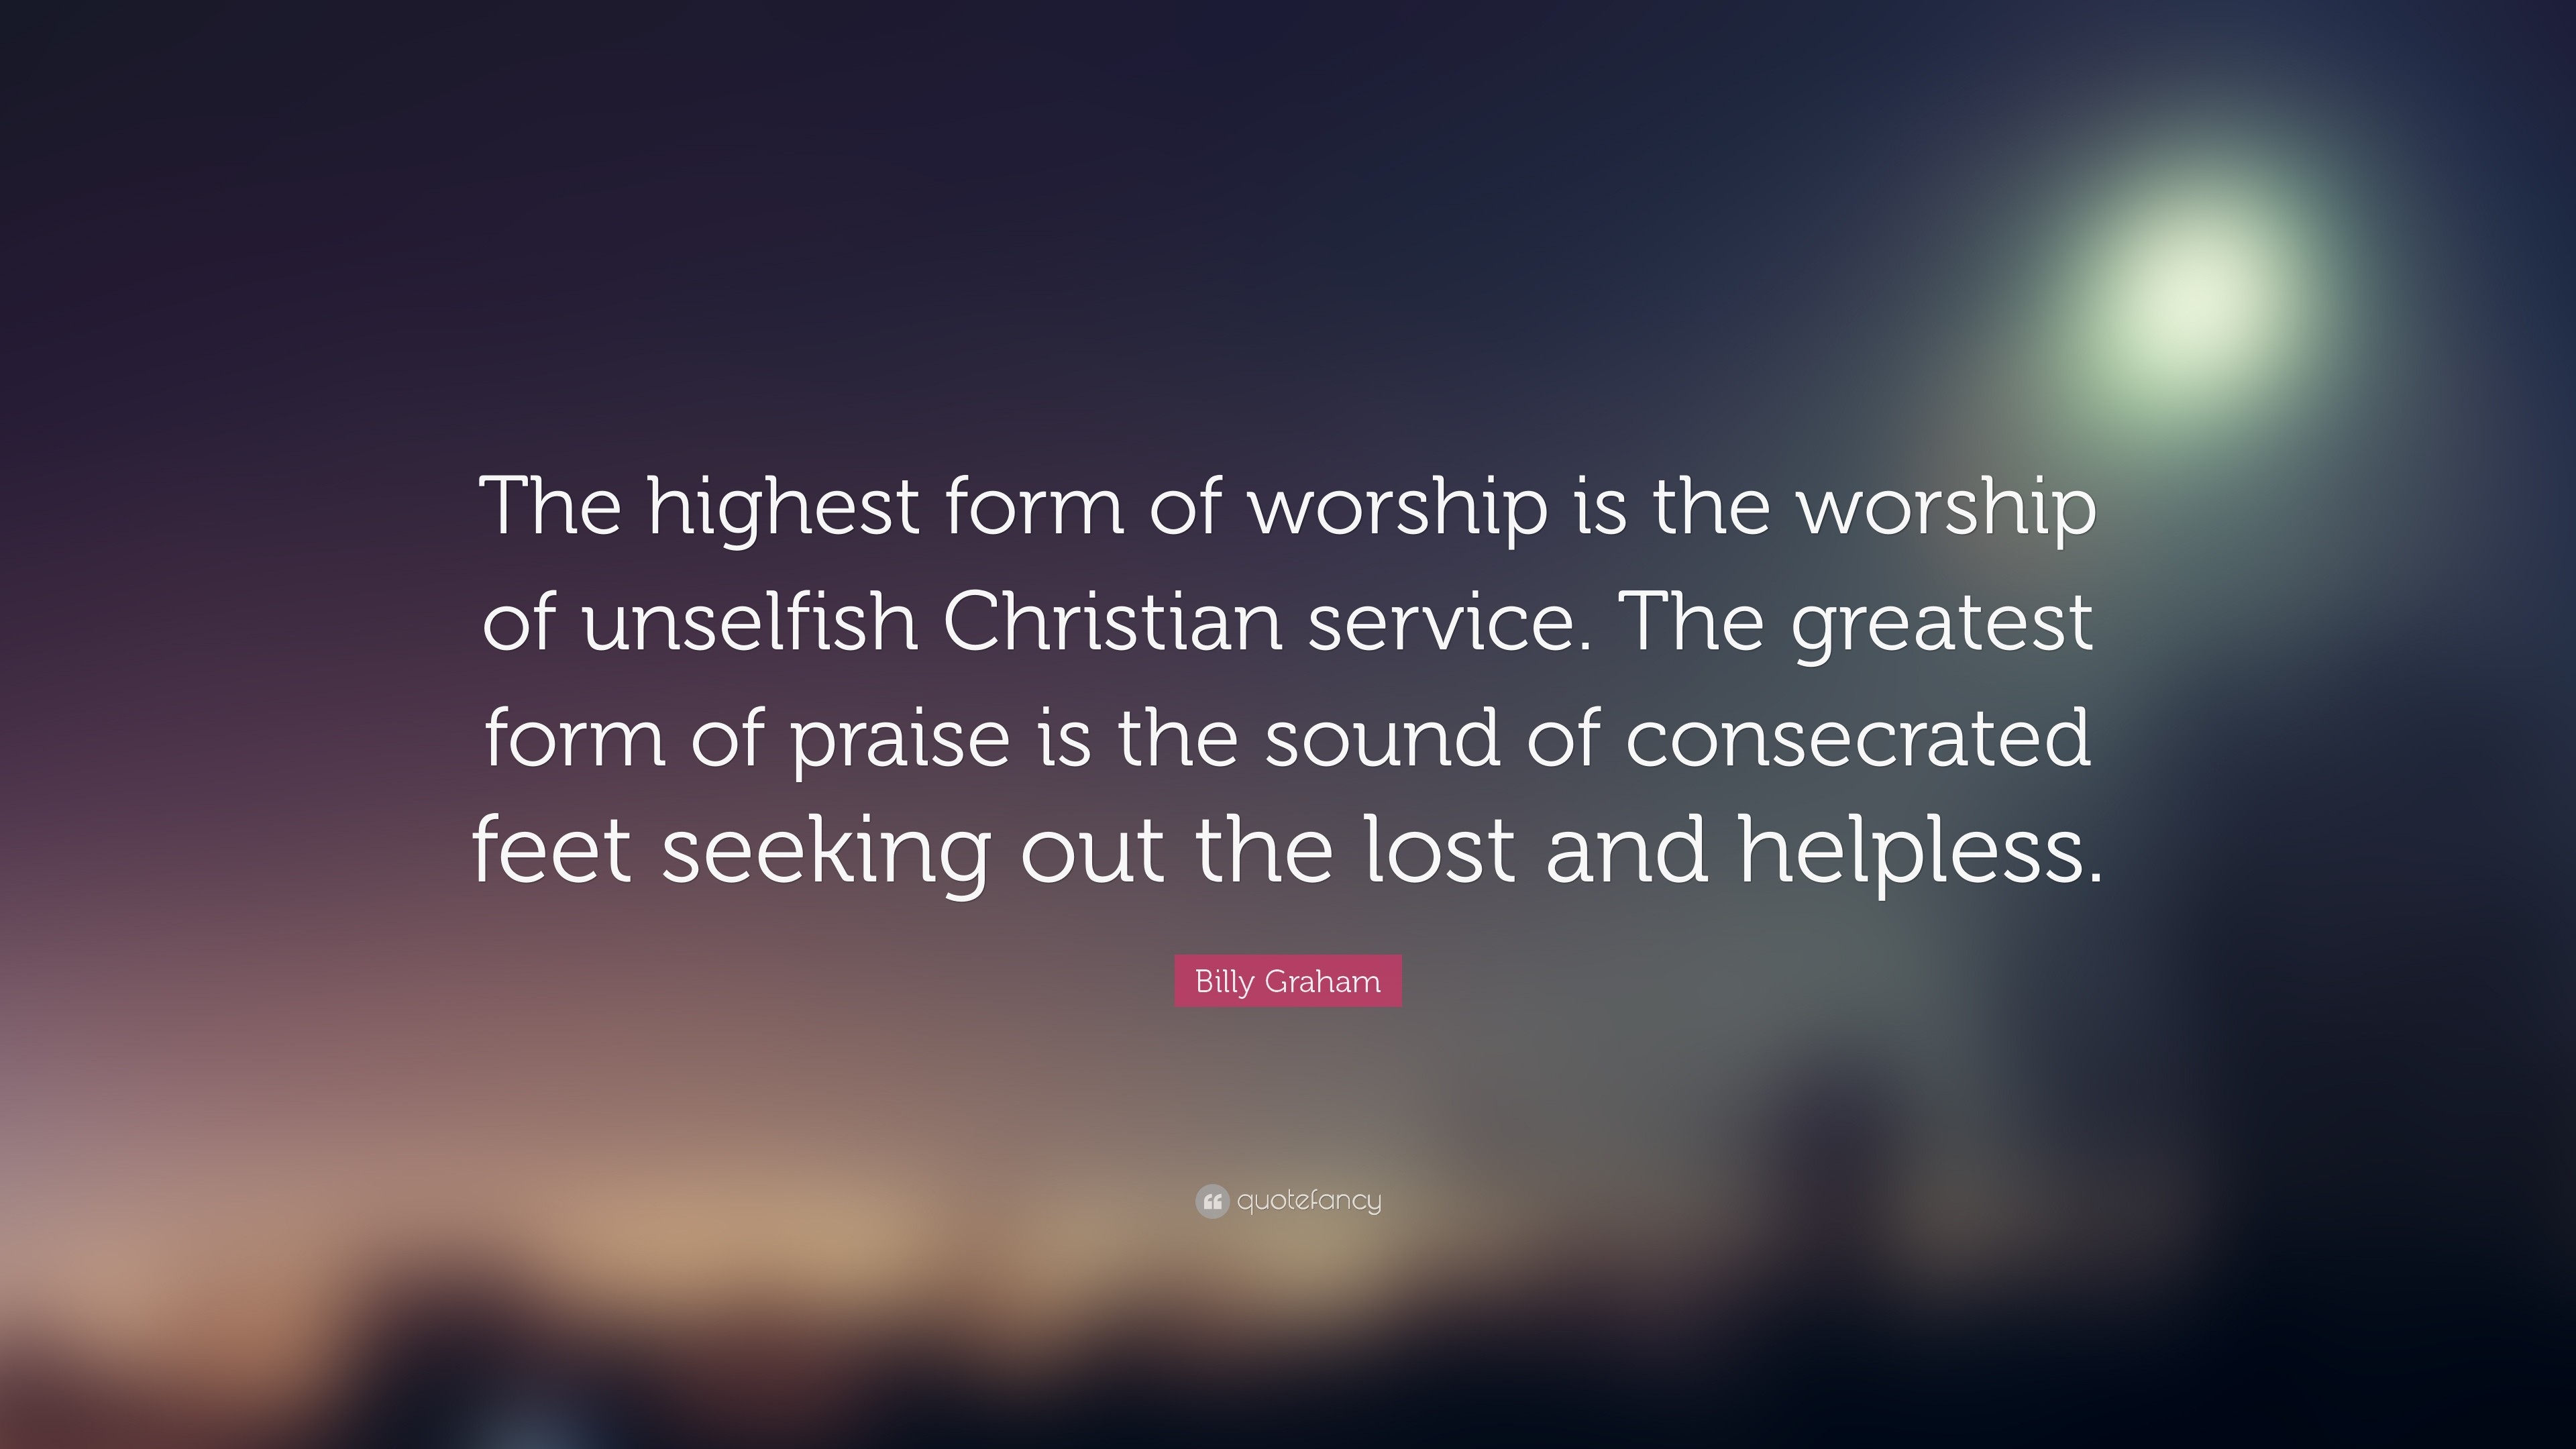 3840x2160 Billy Graham Quote: “The highest form of worship is the worship of  unselfish Christian